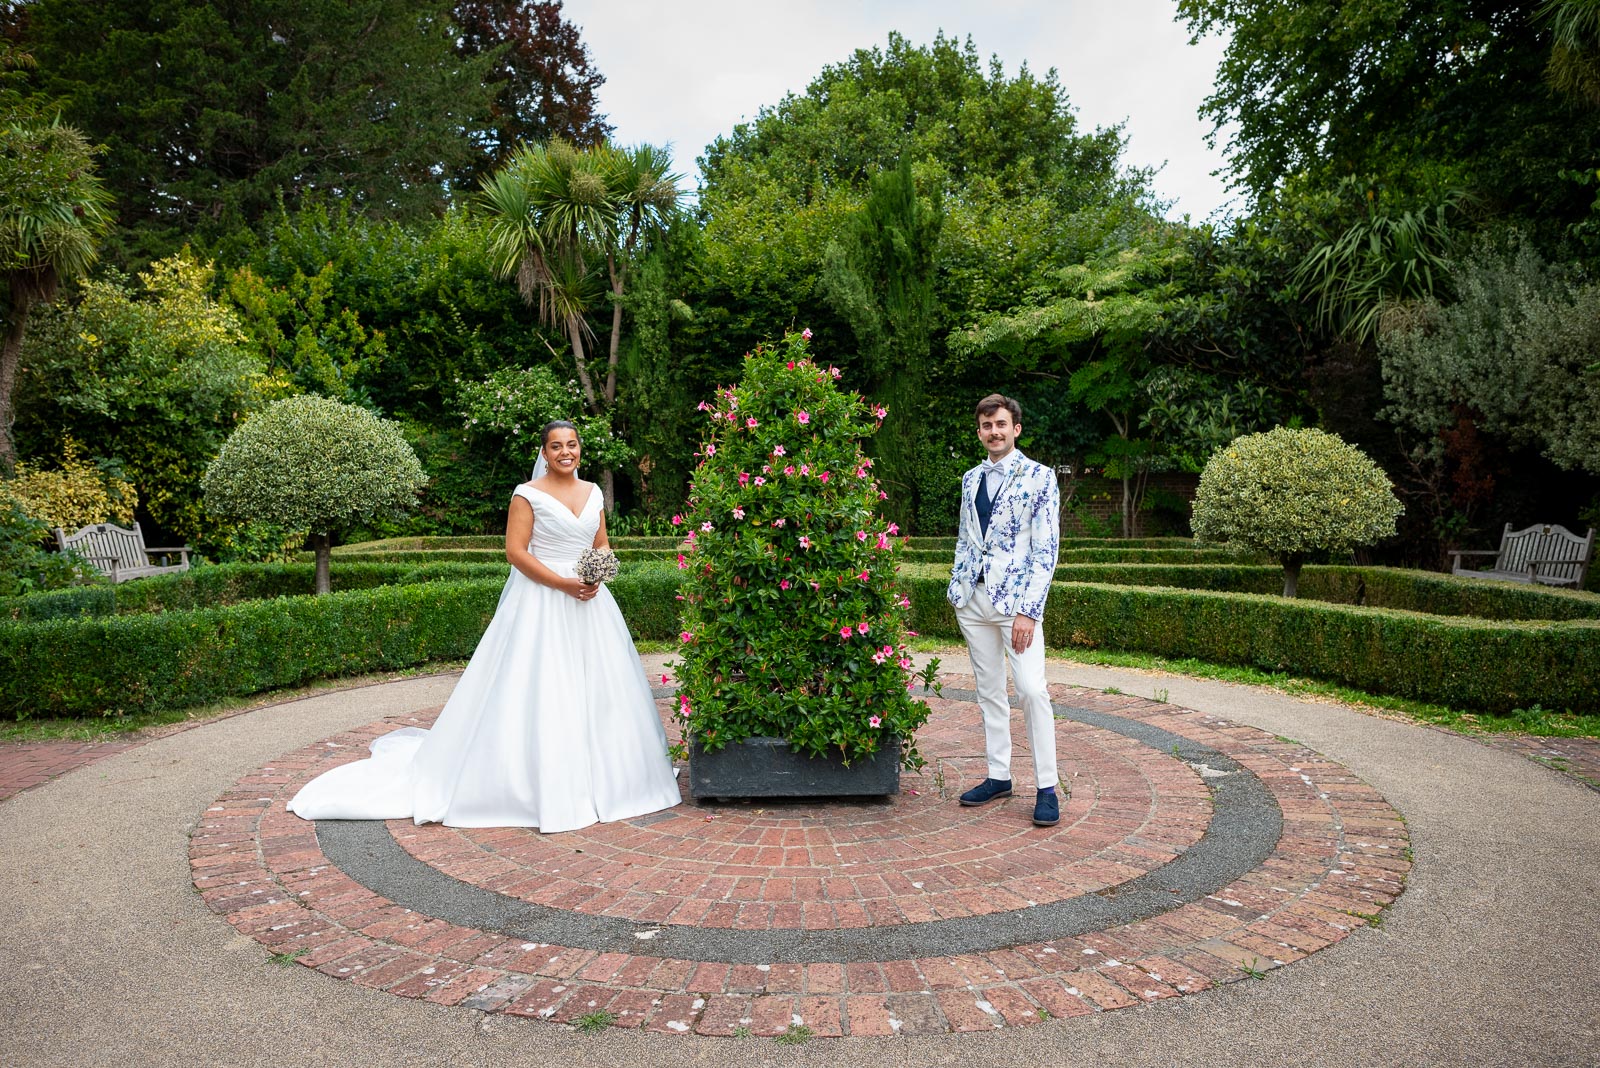 Wedding Photographer for Olivia and Edward at The Royal Oak in Lewes